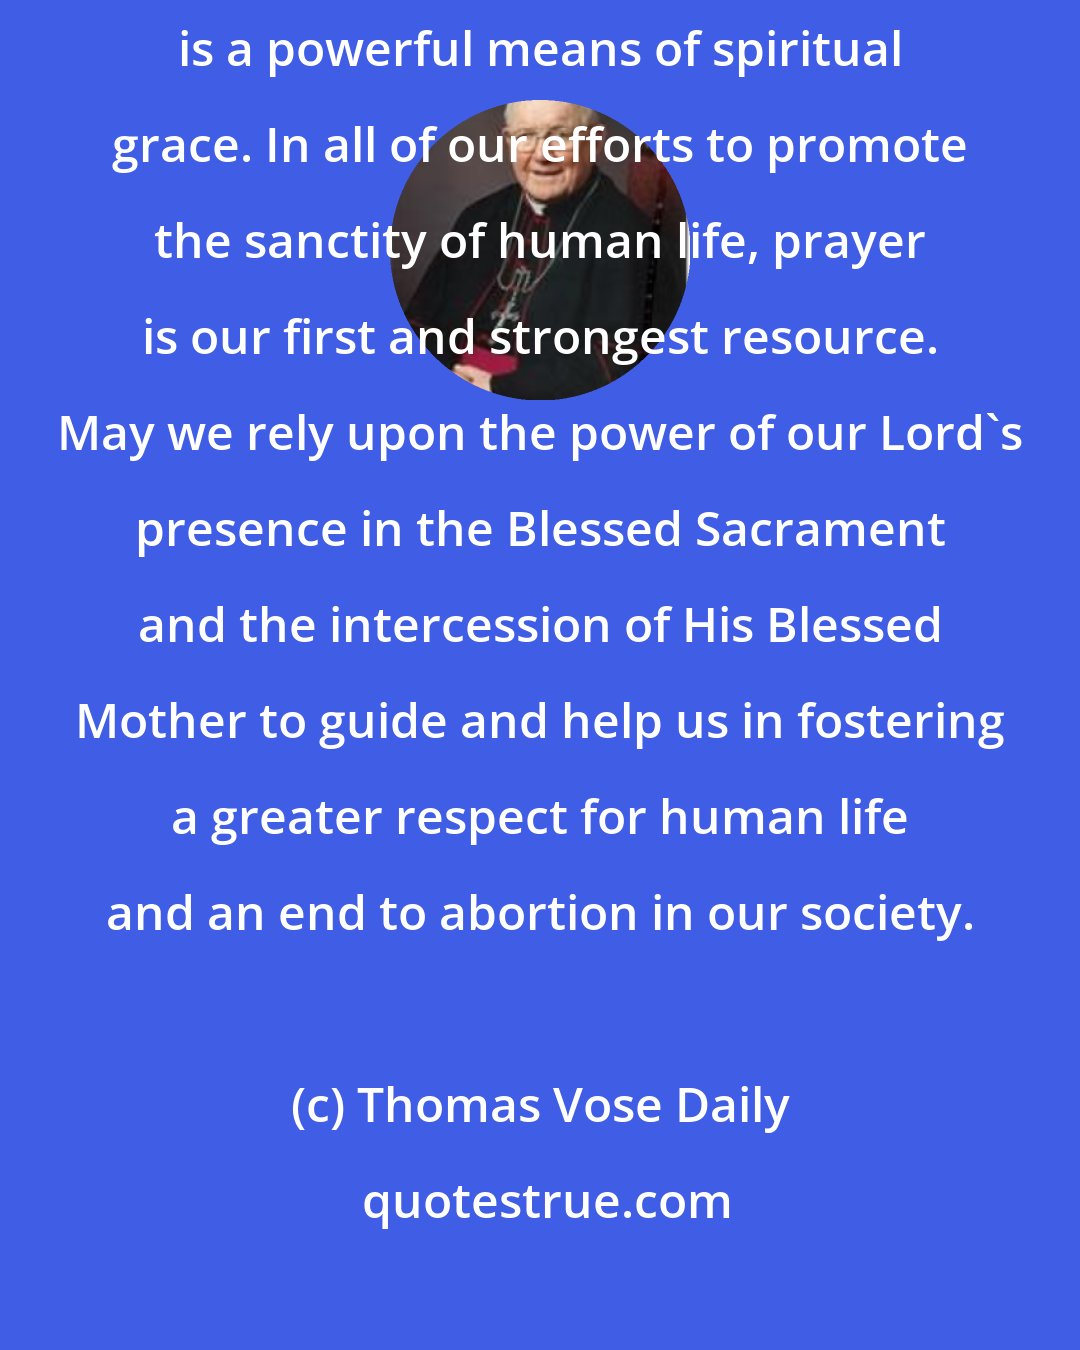 Thomas Vose Daily: The Rosary, especially prayed in the presence of the Blessed Sacrament, is a powerful means of spiritual grace. In all of our efforts to promote the sanctity of human life, prayer is our first and strongest resource. May we rely upon the power of our Lord's presence in the Blessed Sacrament and the intercession of His Blessed Mother to guide and help us in fostering a greater respect for human life and an end to abortion in our society.